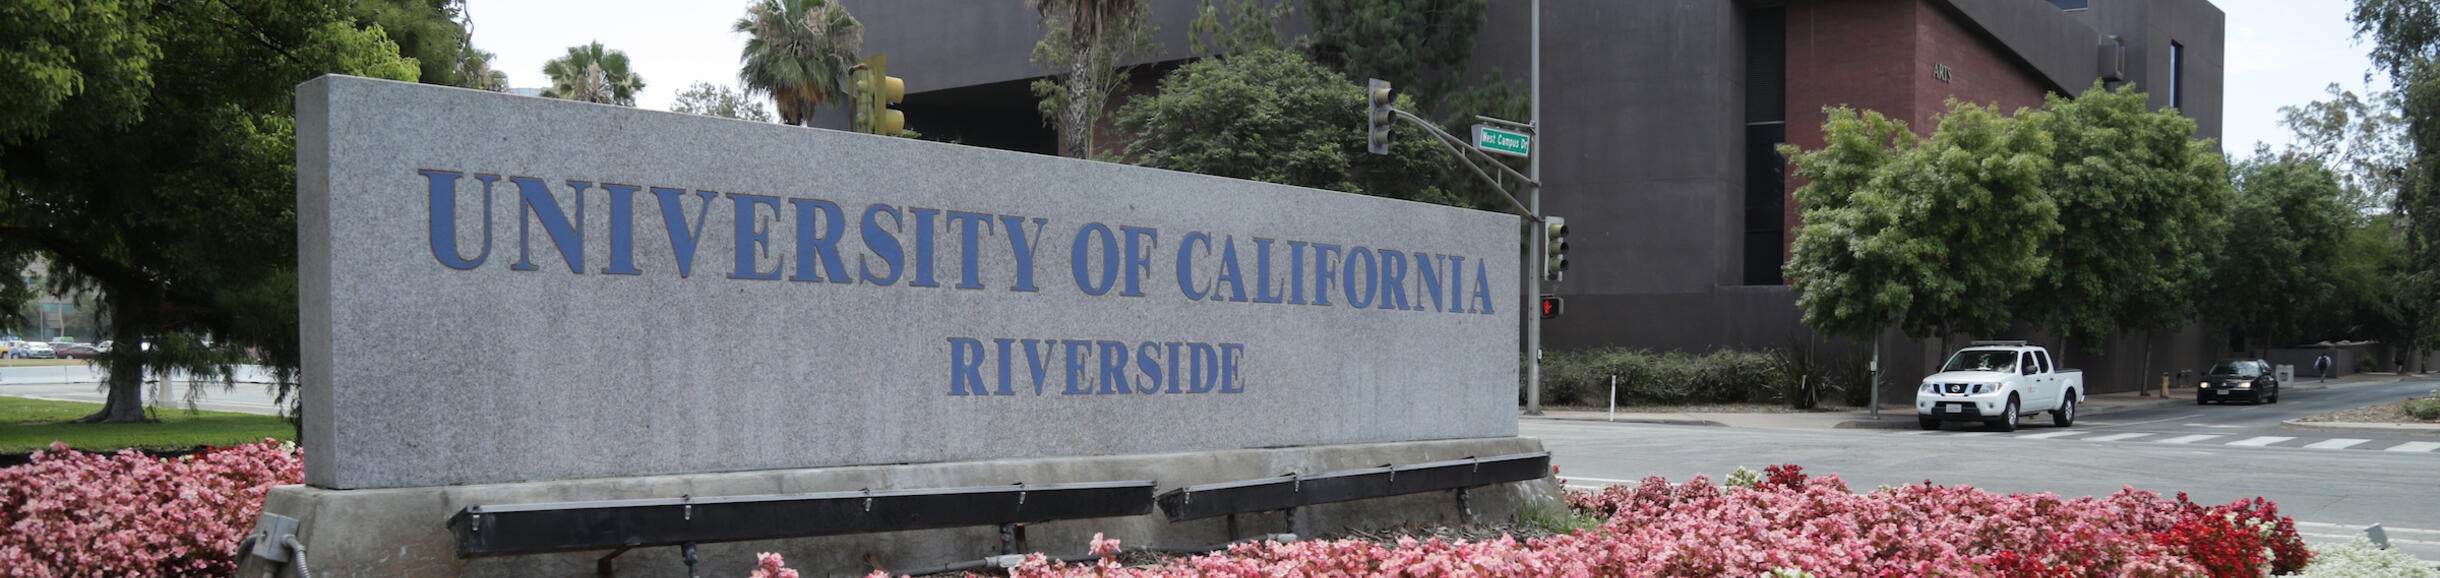 UCR Sign surrounded by flowers